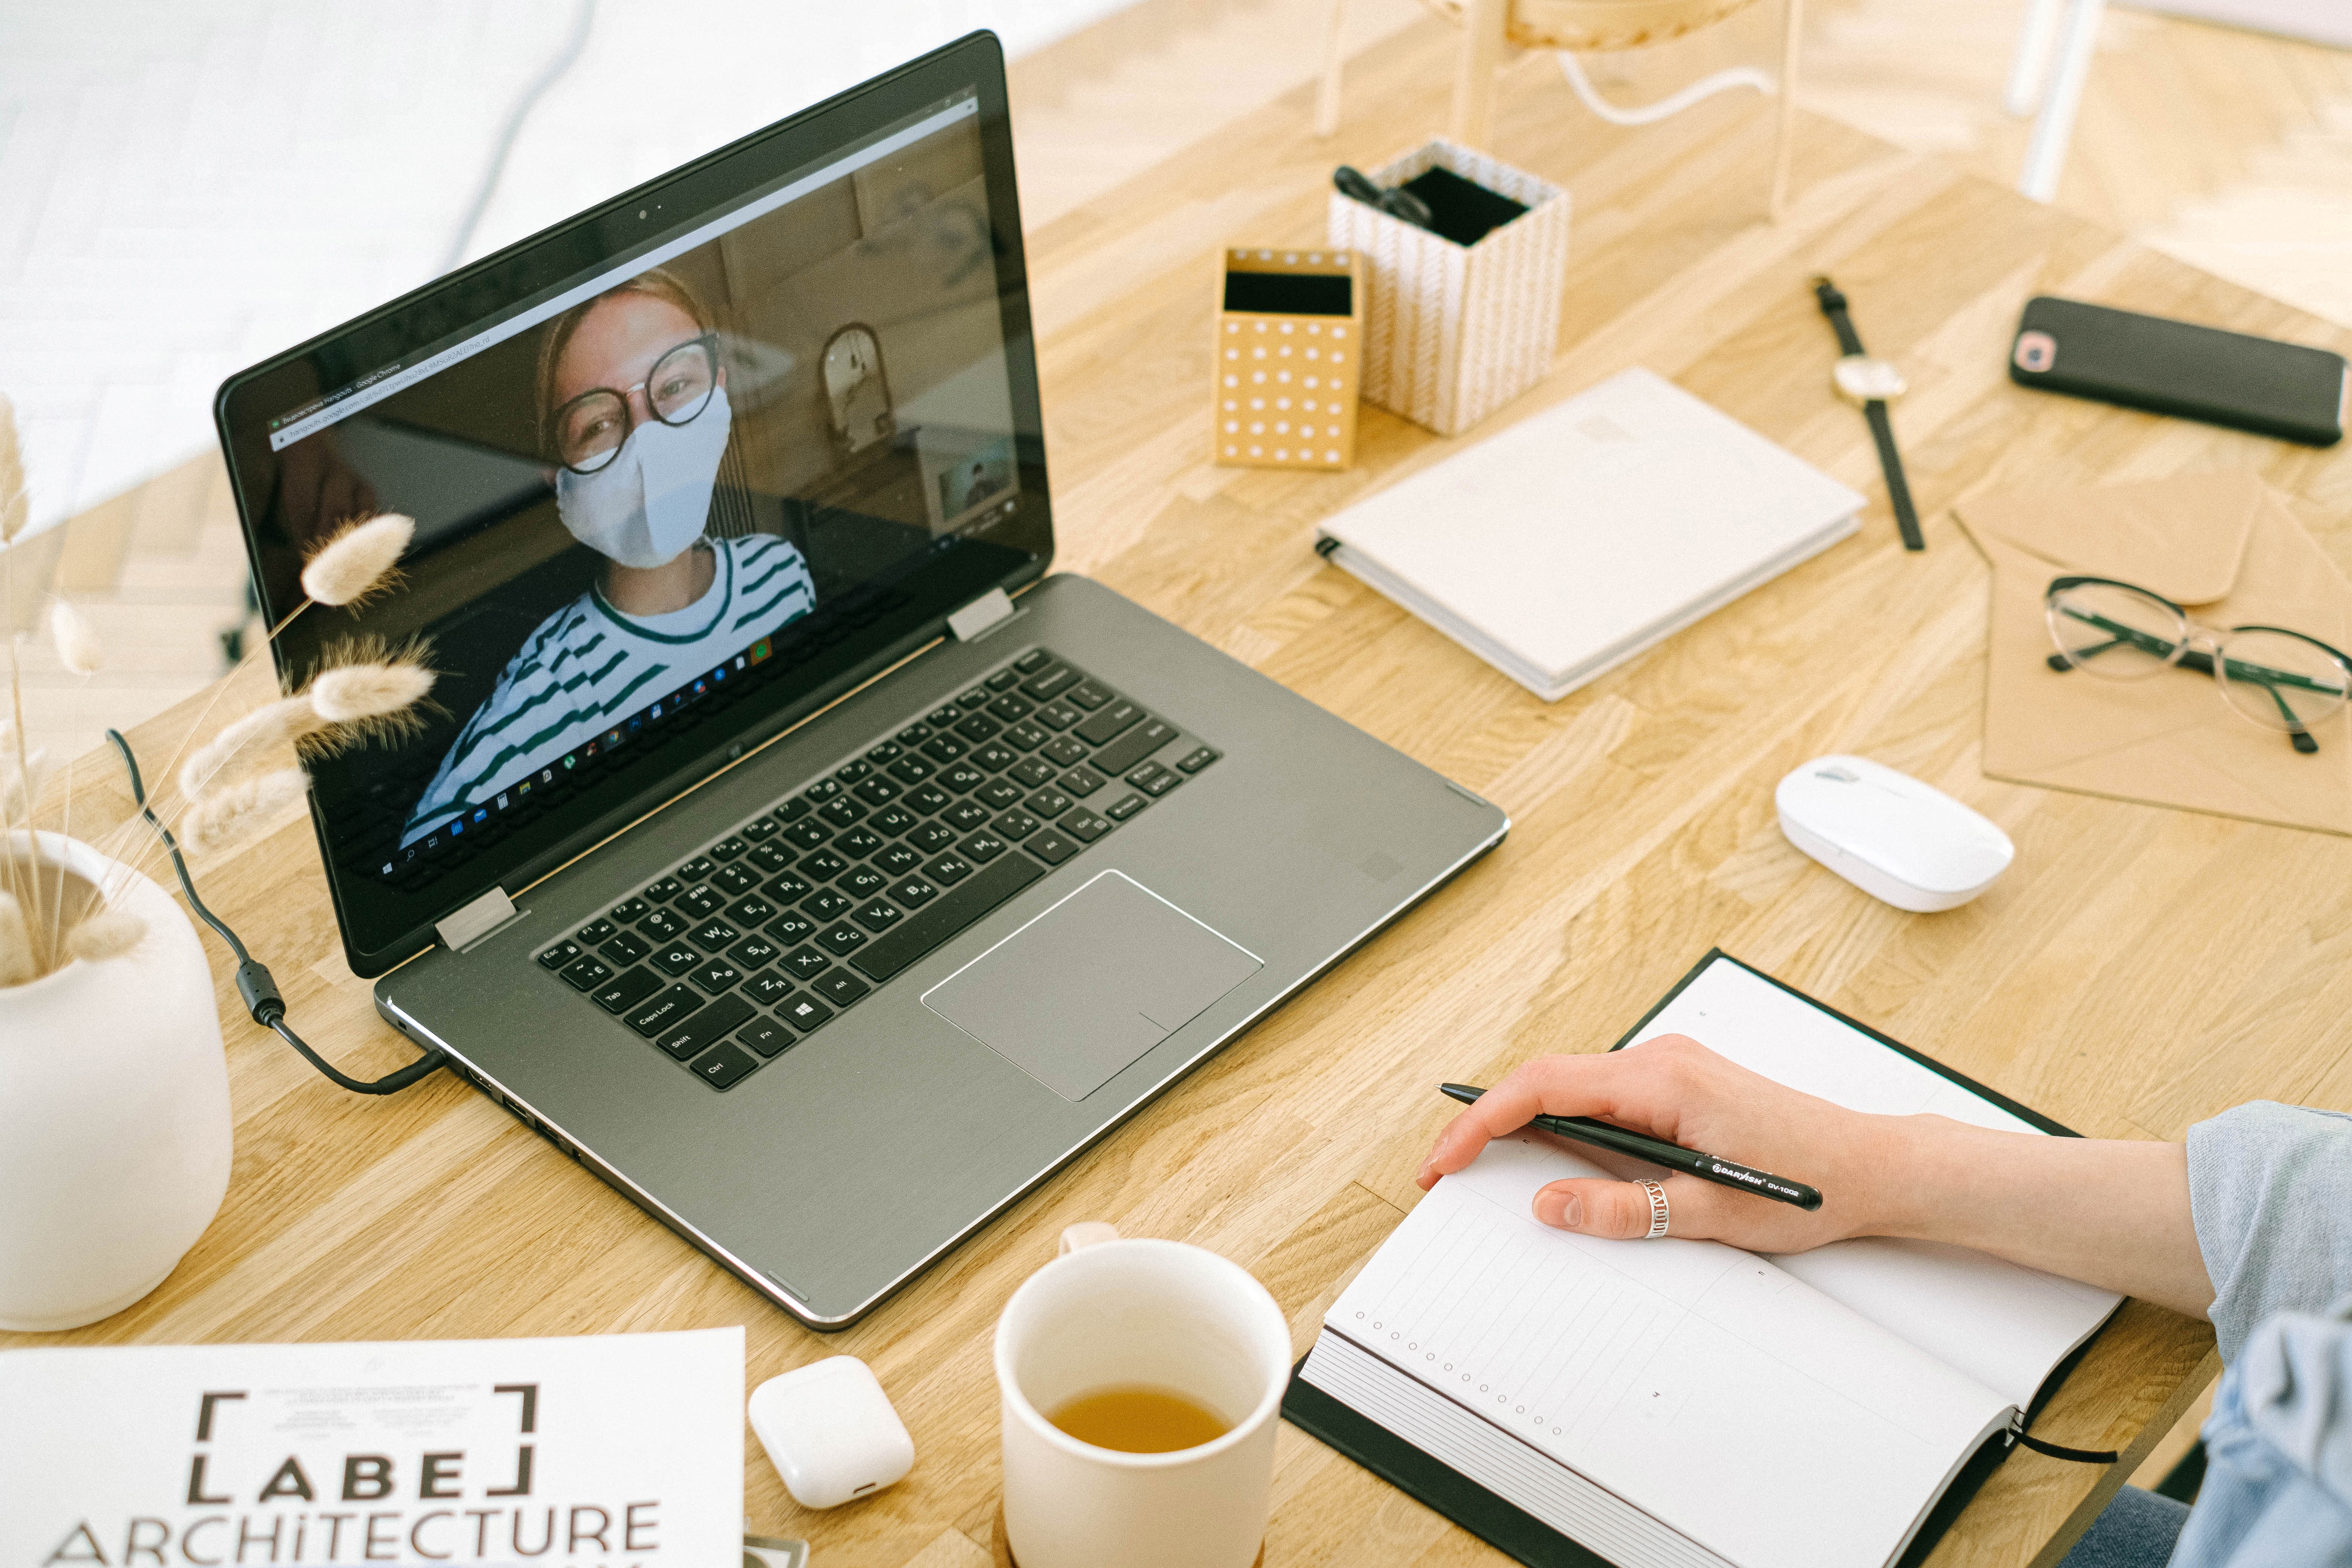  Online consultation with a legal professional, featuring a person wearing a mask on a laptop screen, surrounded by a well-organized desk with notepads, a cup of coffee, and office supplies, highlighting remote legal services during COVID-19.